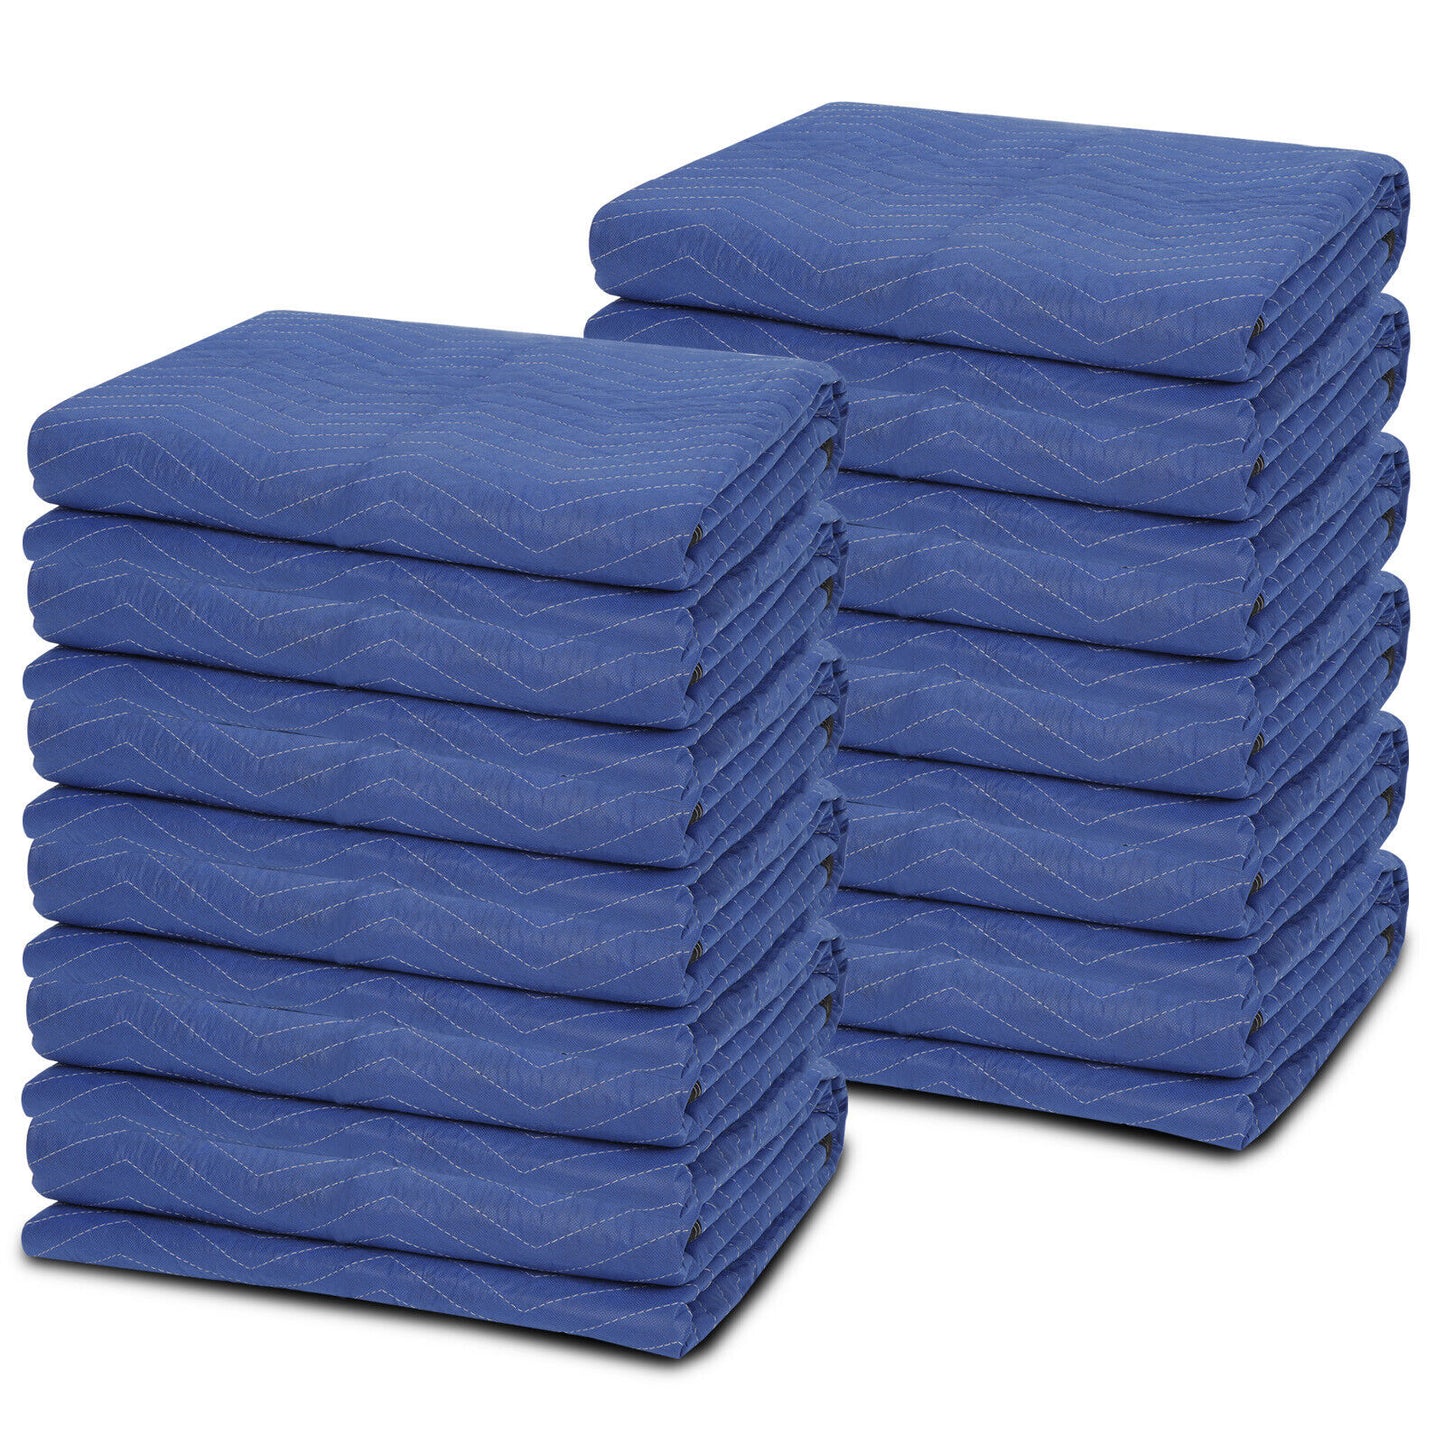 12 Moving Blankets 80" x 72" Mats Deluxe Quilted Shipping Furniture Pads 35lb/dz